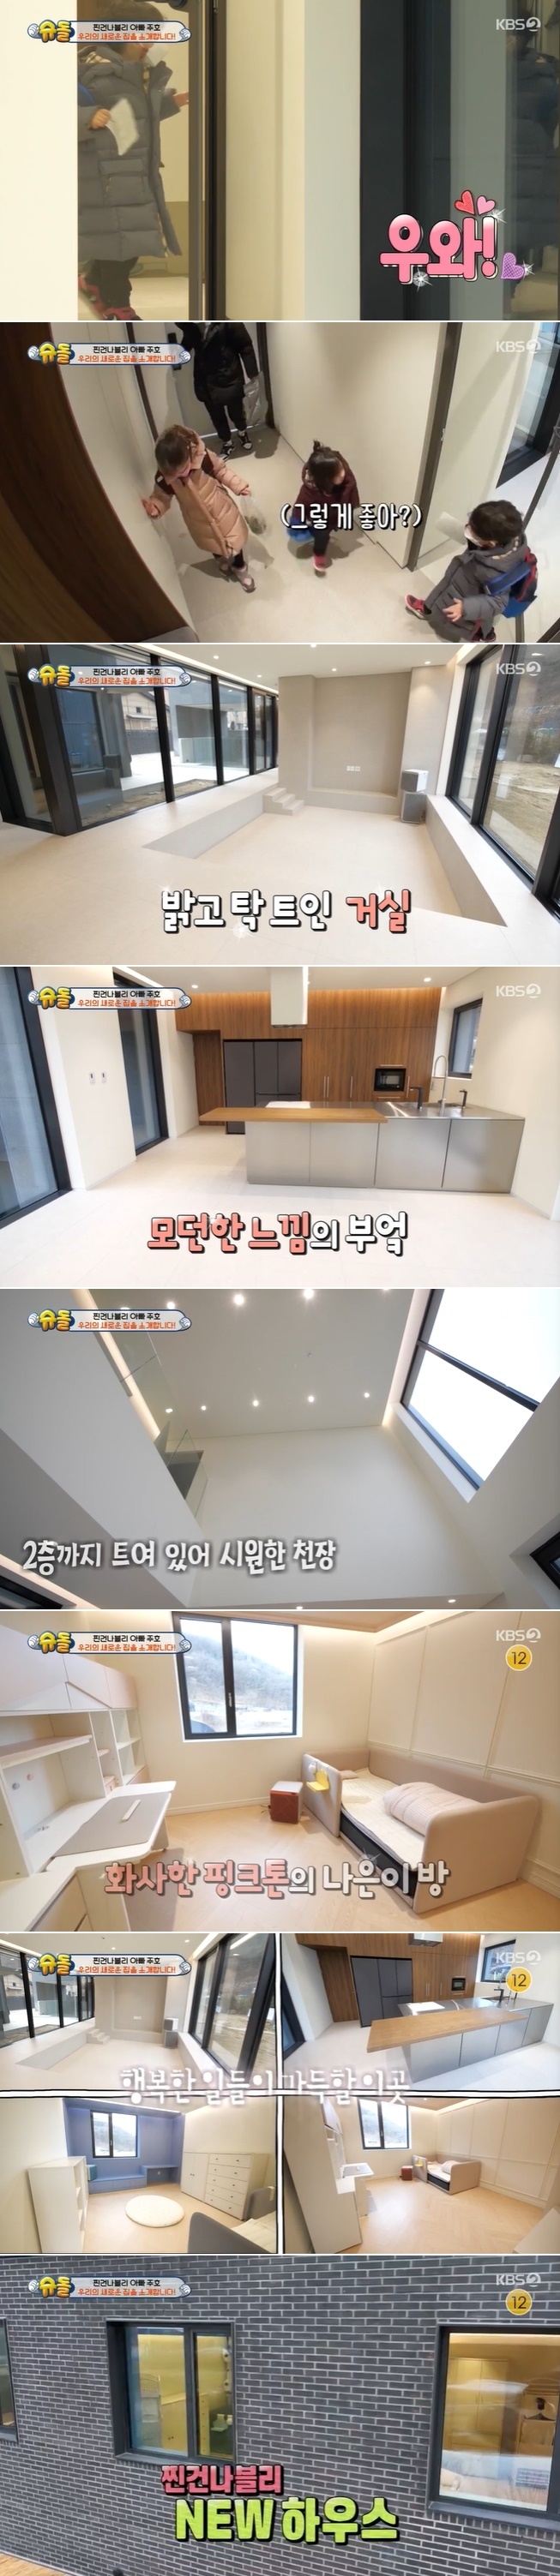 Park Joo-hos family has been in the spotlight for unveiling their new luxury home.On January 23, KBS 2TV The Return of Superman showed Park Joo-hones family unveiling a new house in Hanam.As it was known that the opinions of the children were reflected from the time of the first building, it was enough to curiosity the viewers about what the finished appearance would be.The new house of these families, which was released through the broadcast, was reminiscent of a luxury mansion in the movie parasite.The sunny glass living room was similar to the gallery, and the modern kitchen at the end of the long corridor attracted attention.Above all, the second floor was surprised by the Na-eun room of Pinkton, the blue-toned Ghanhu room, the small Qiao Zhenyu room, as well as the terrace where you can see the sky.Born in 2000, Qiao Zhenyu, who is three years old this year, is delighted with his own space.Qiao Zhenyu, who had been sad because he did not have a private space, had a good time in his room.Park Joo-ho and Chin Gun Nablis were also shown enjoying emotional camping on the terrace on the second floor.Park Joo-ho prepared a tent for the children and said, It is winter sensibility. However, when the children were lined up in the cold, Are you leaving your dad?He also shows a sad appearance and makes a laugh.In addition, Na-eun and Gunhu, who were satisfied with the new house, showed their sense and set up a room.Ill bring a book, said Na-eun, who is breaking, and Ghanhu showed off his own sense by painting a colorful picture.